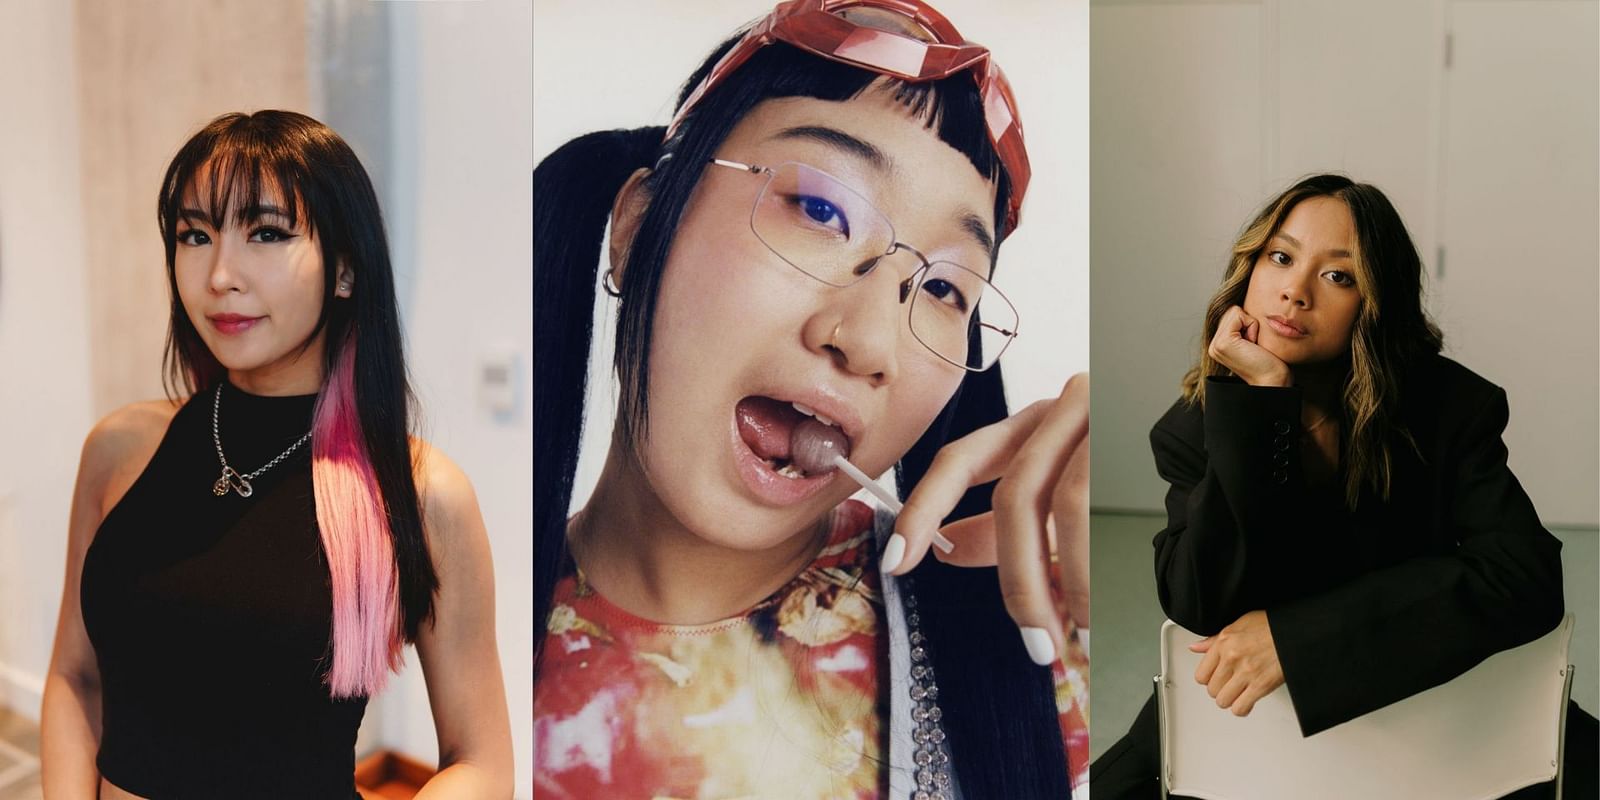 Crunchyroll reveals Megan Thee Stallion, LiSa, and other presenters for